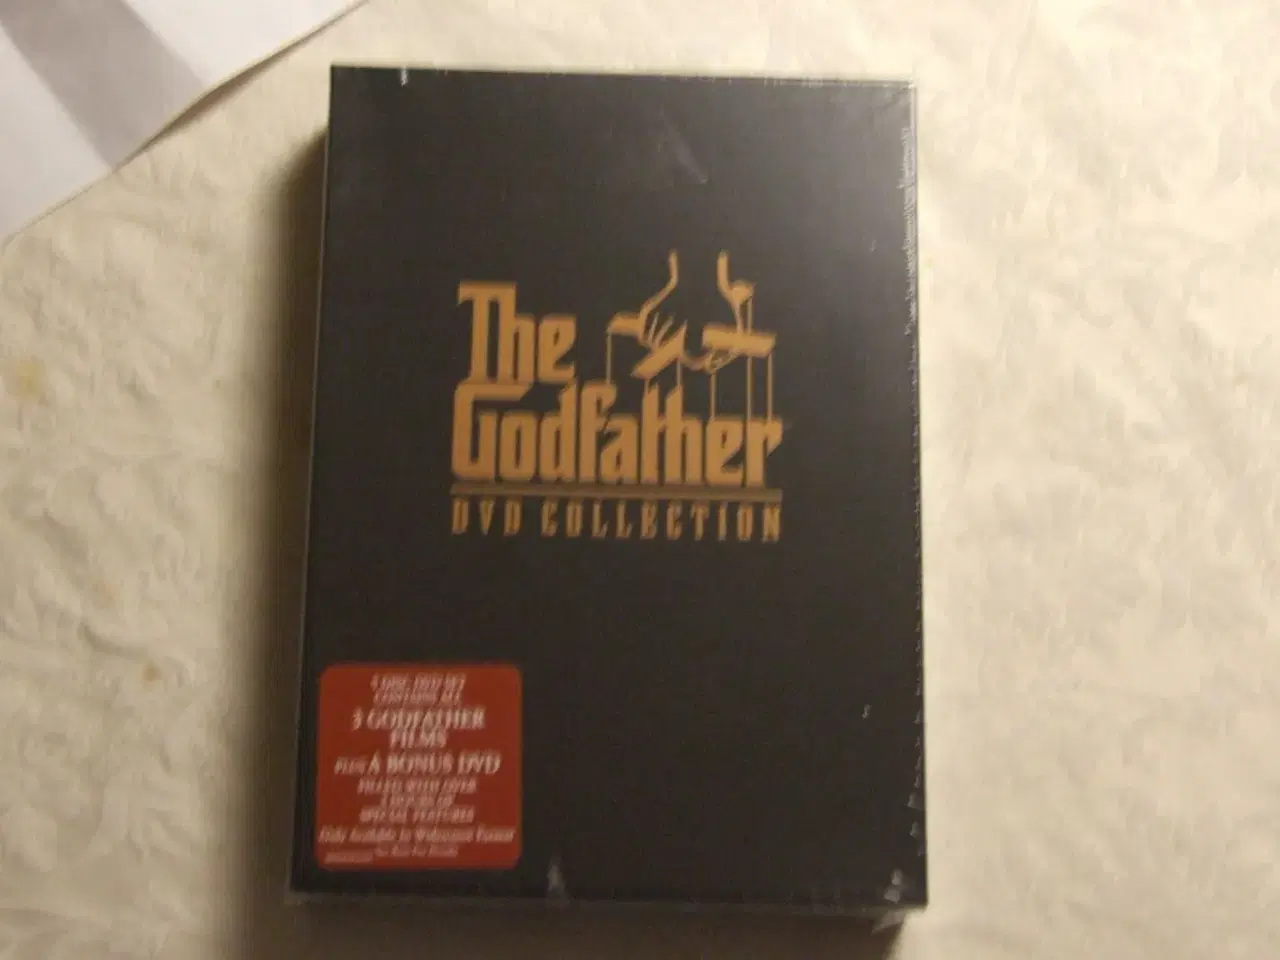 Billede 1 - The Godfather Collection.